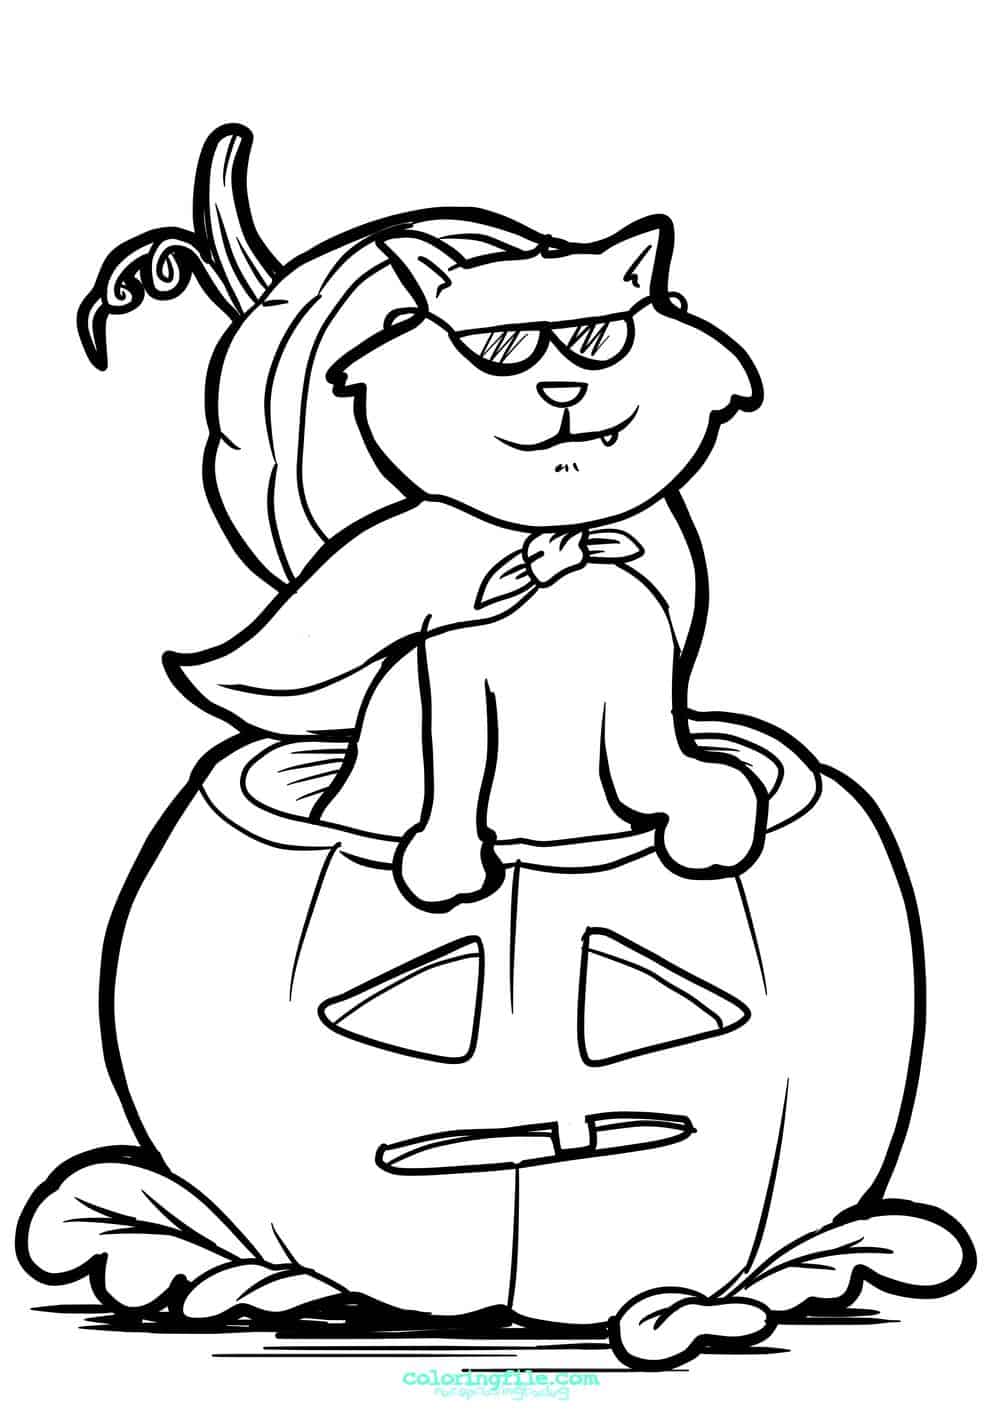 Halloween cat and pumpkin coloring pages